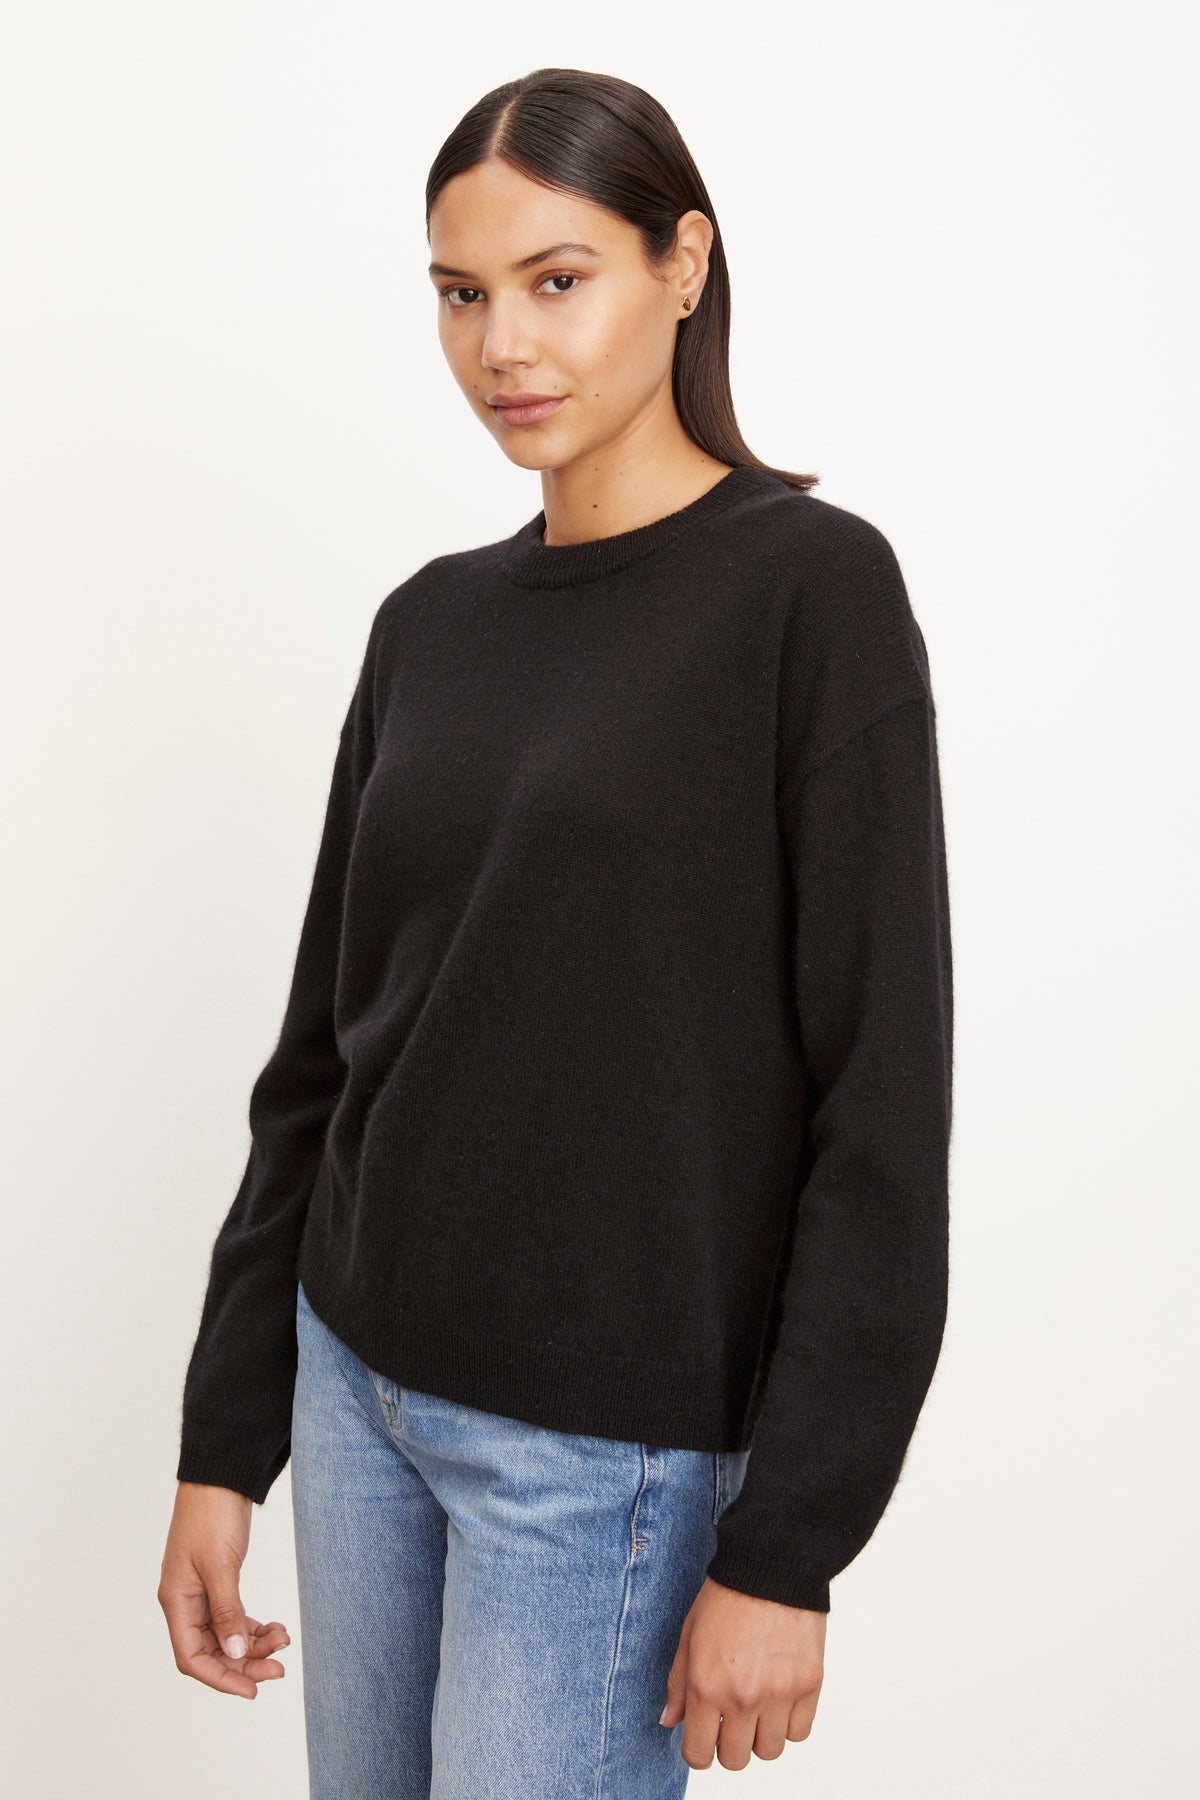 The BRYNNE CASHMERE CREW NECK SWEATER in black, from Velvet by Graham & Spencer.-26883604218049